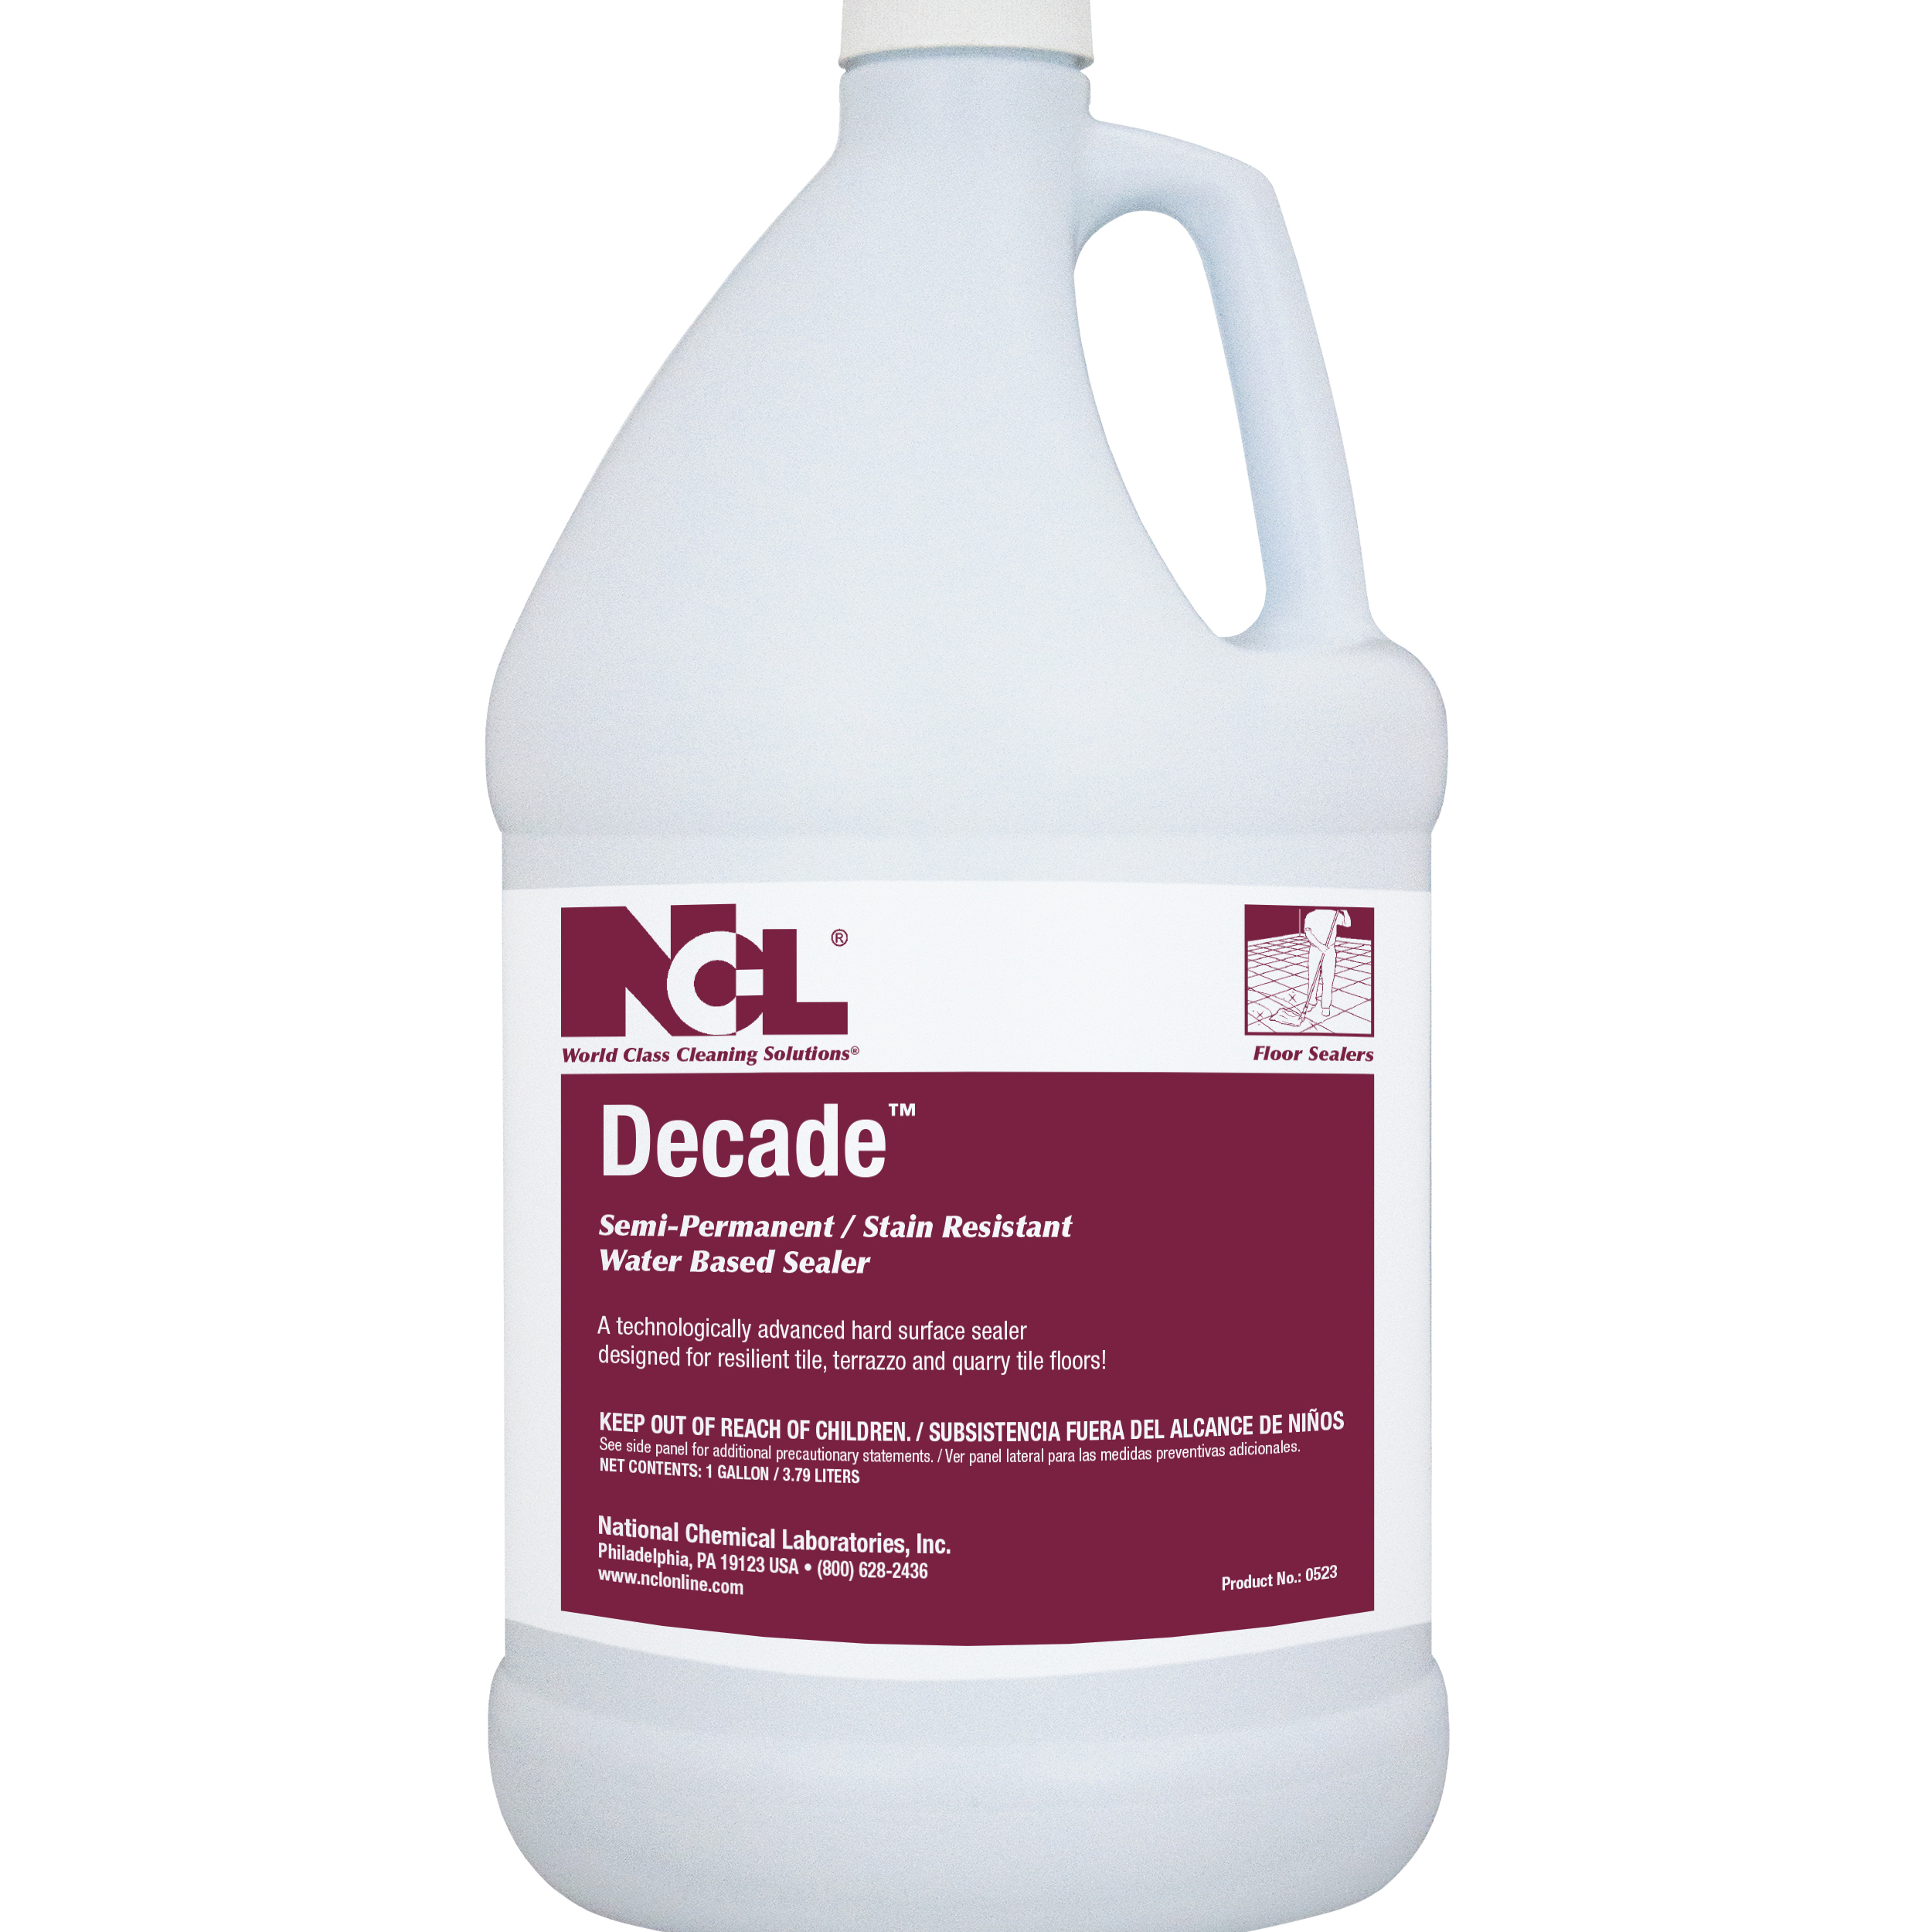  DECADE Semi-Permanent / Stain Resistant Water Based Sealer 4/1 Gal. Case (NCL0523-29) 